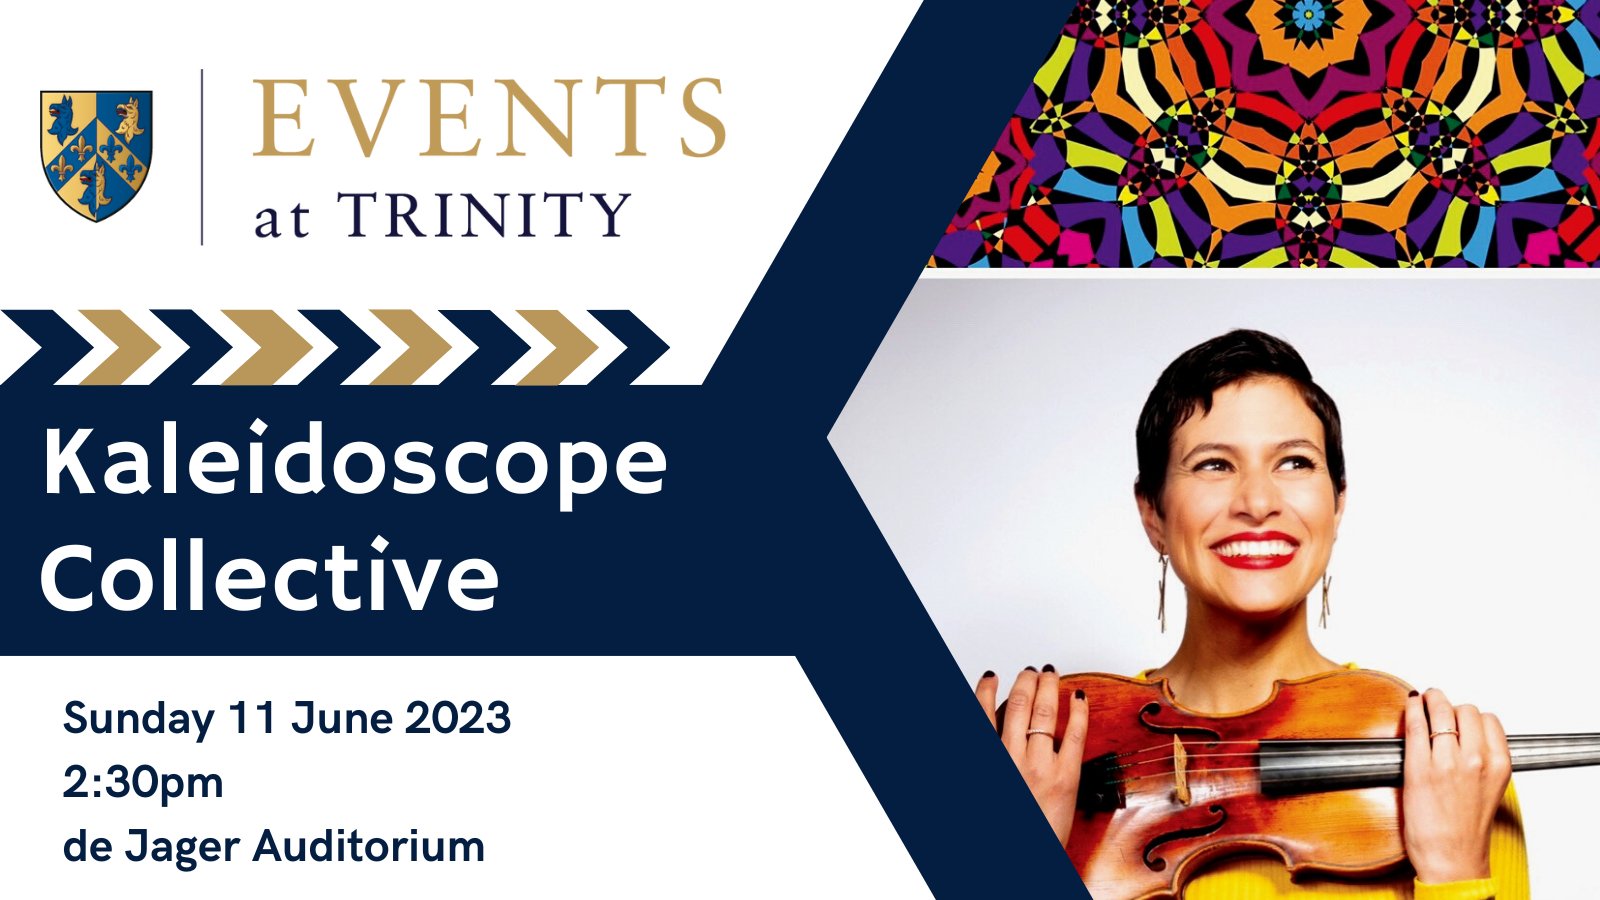 A graphic advertising the Kaleidoscope Collective Concert at Trinity college on 11 June at 2:30pm.